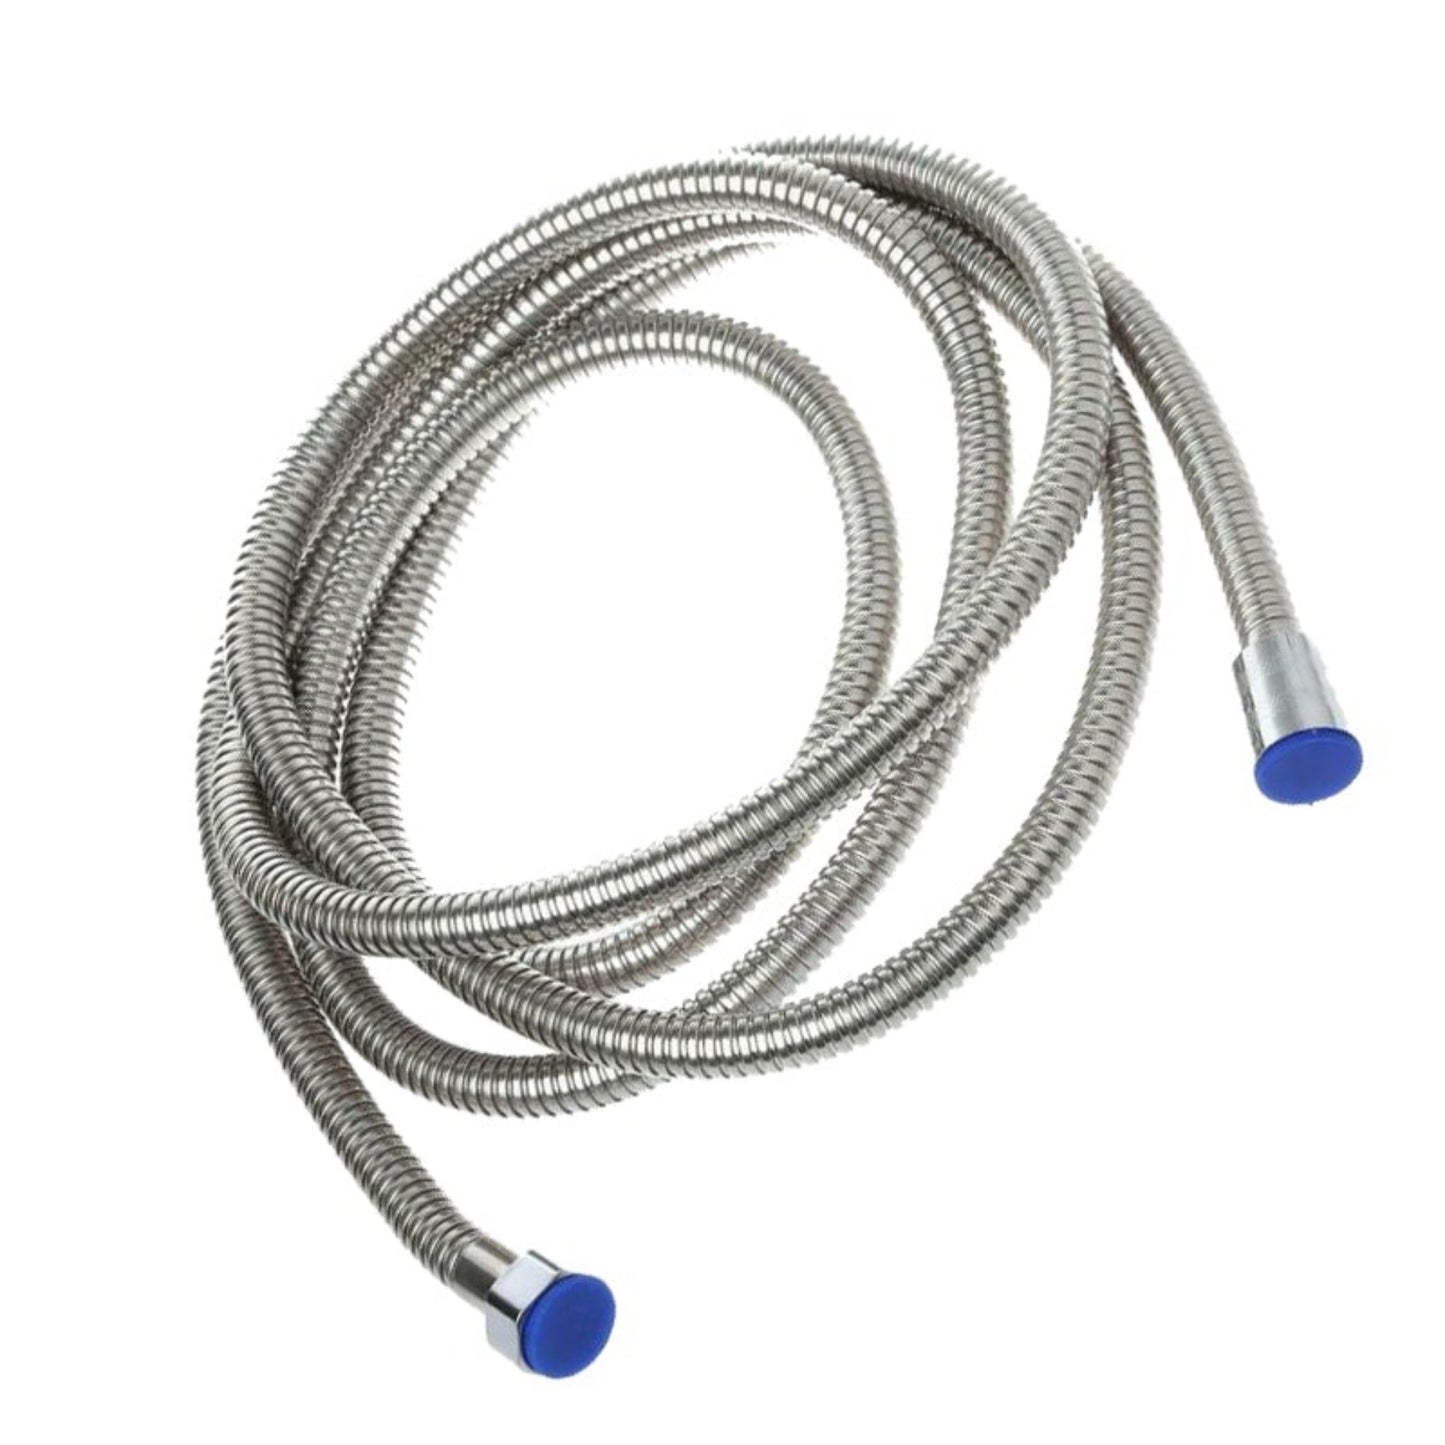 3m-Non-Kink-Shower-Hose-Accessory-Country-Comfort